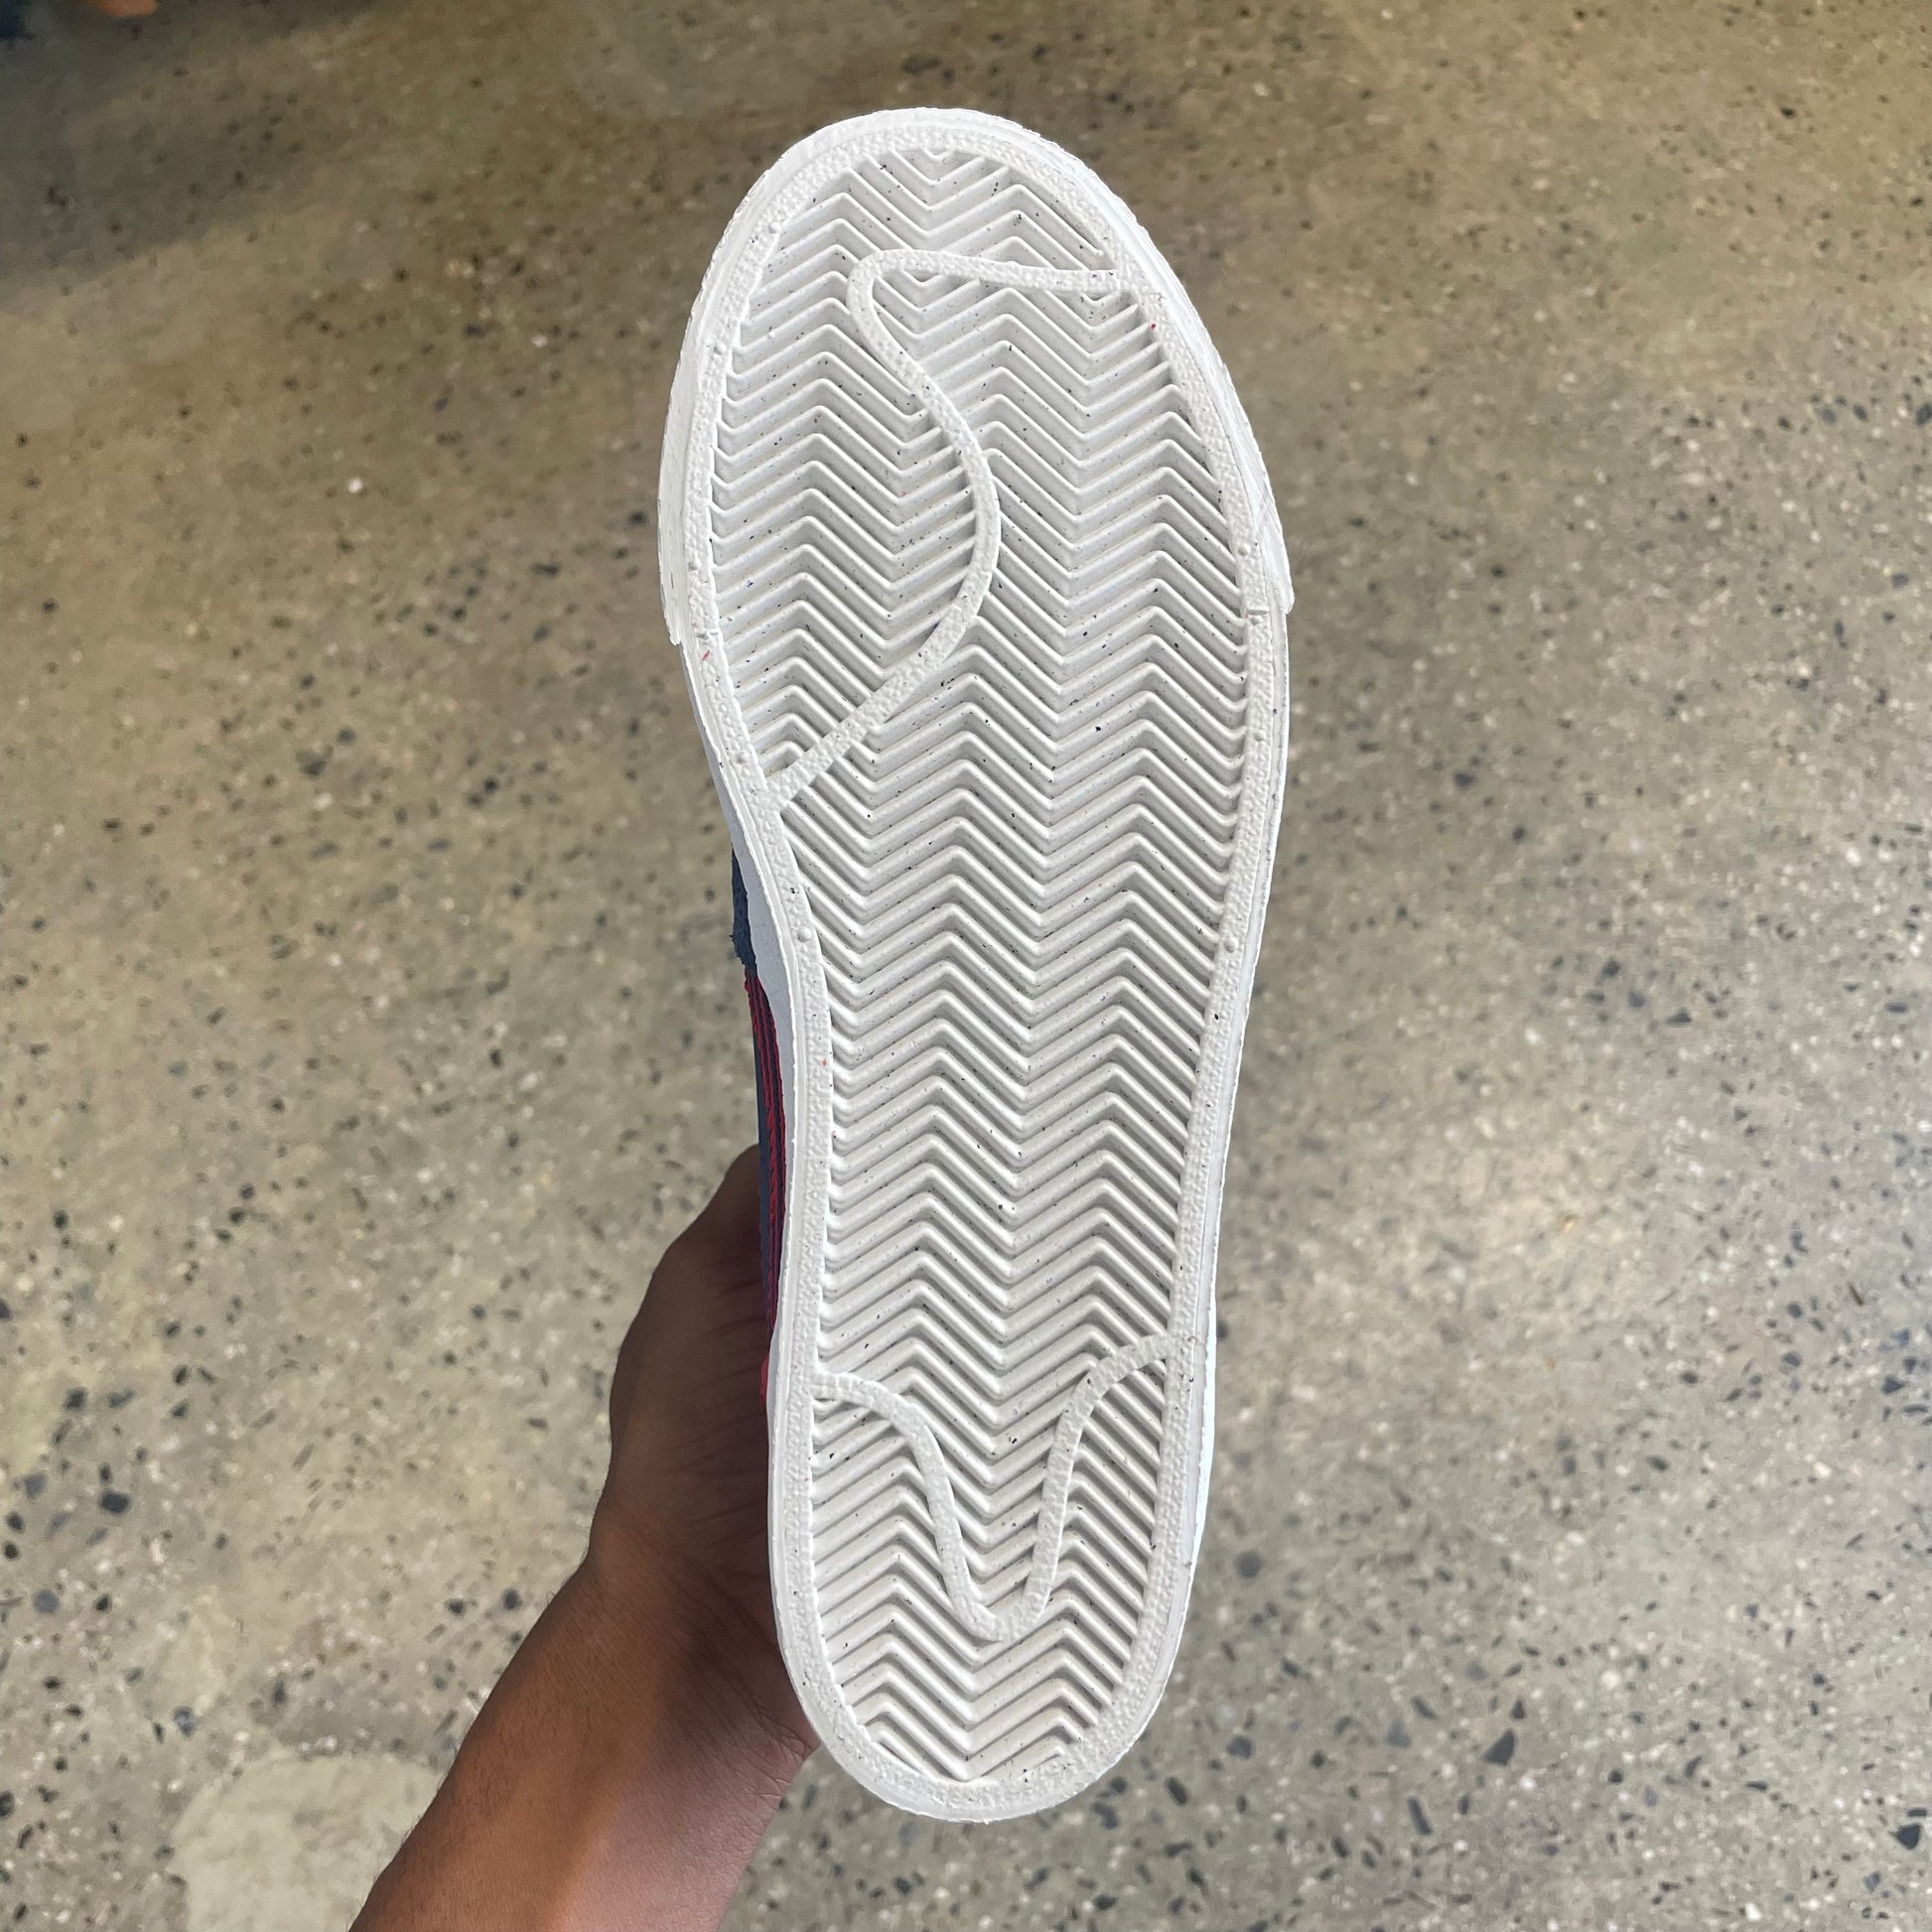 view of bottom of shoe, white gum rubber sole